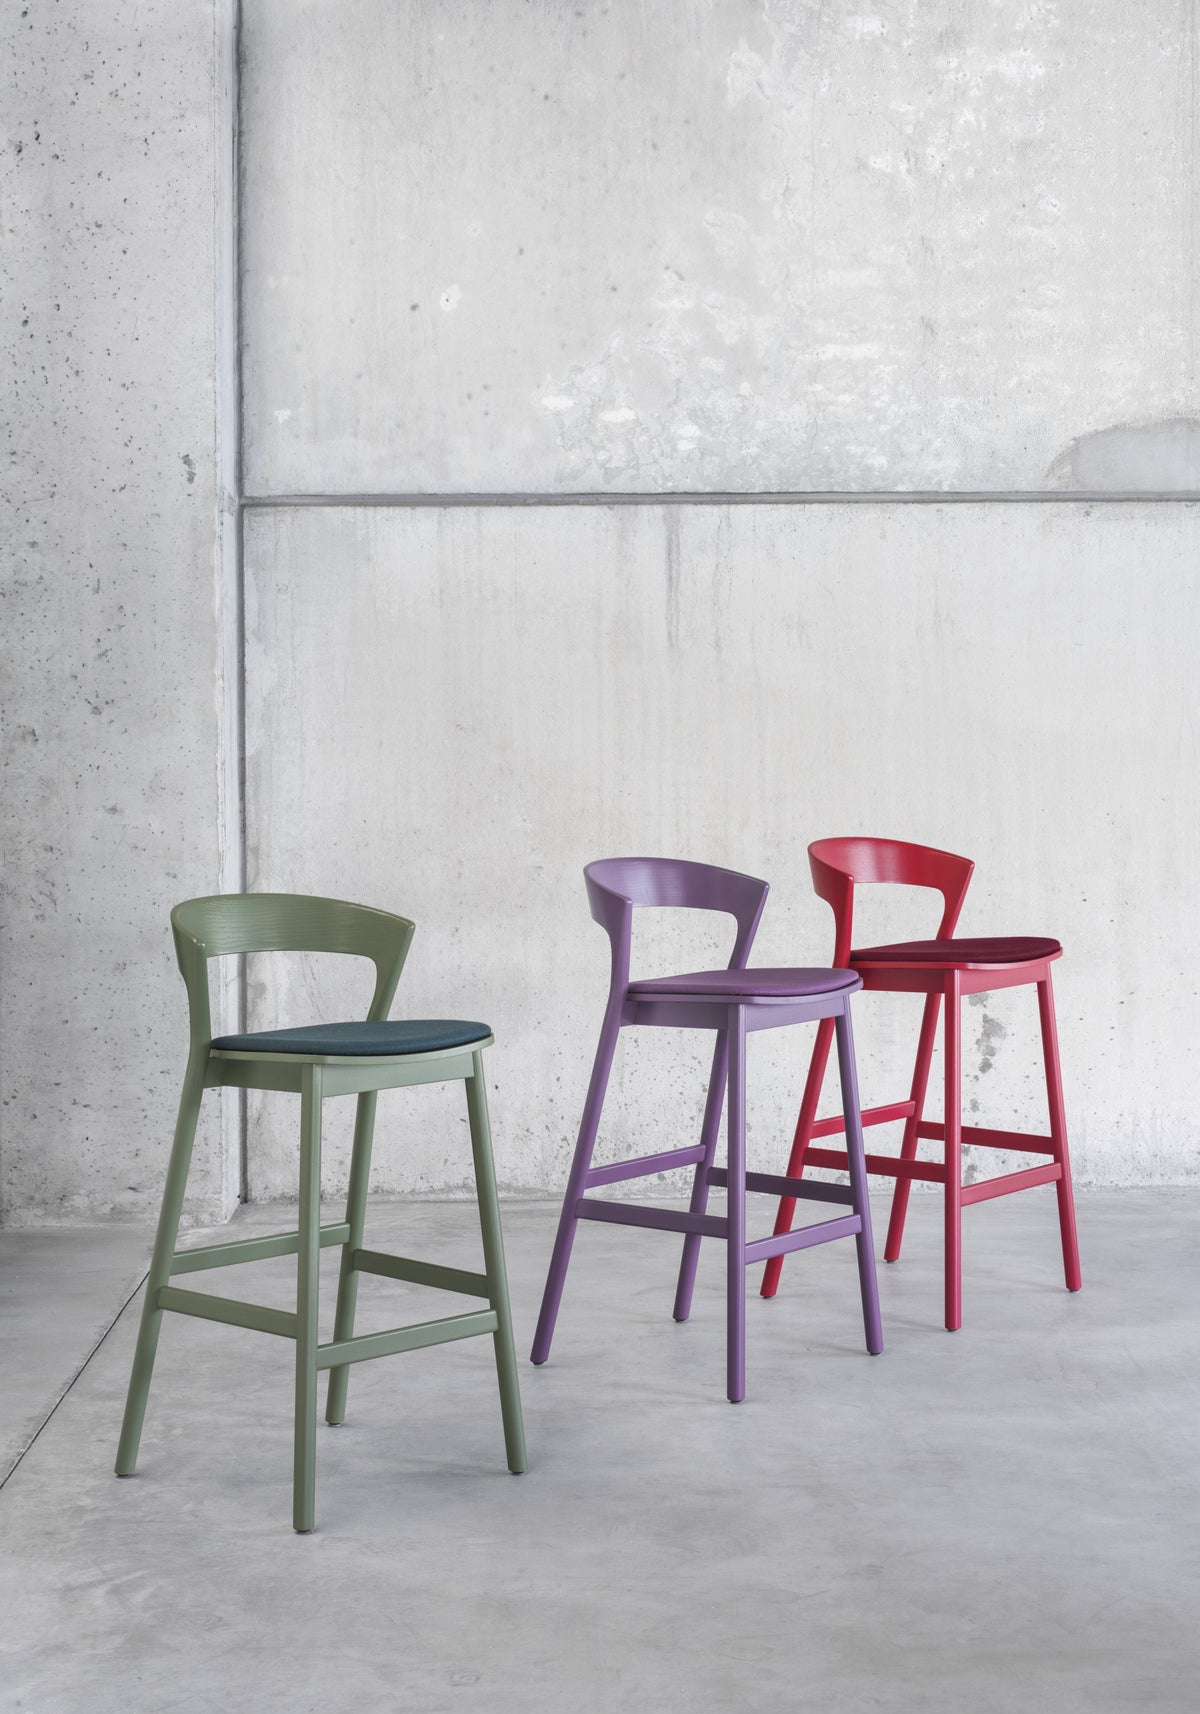 Edith High Stool-Traba-Contract Furniture Store